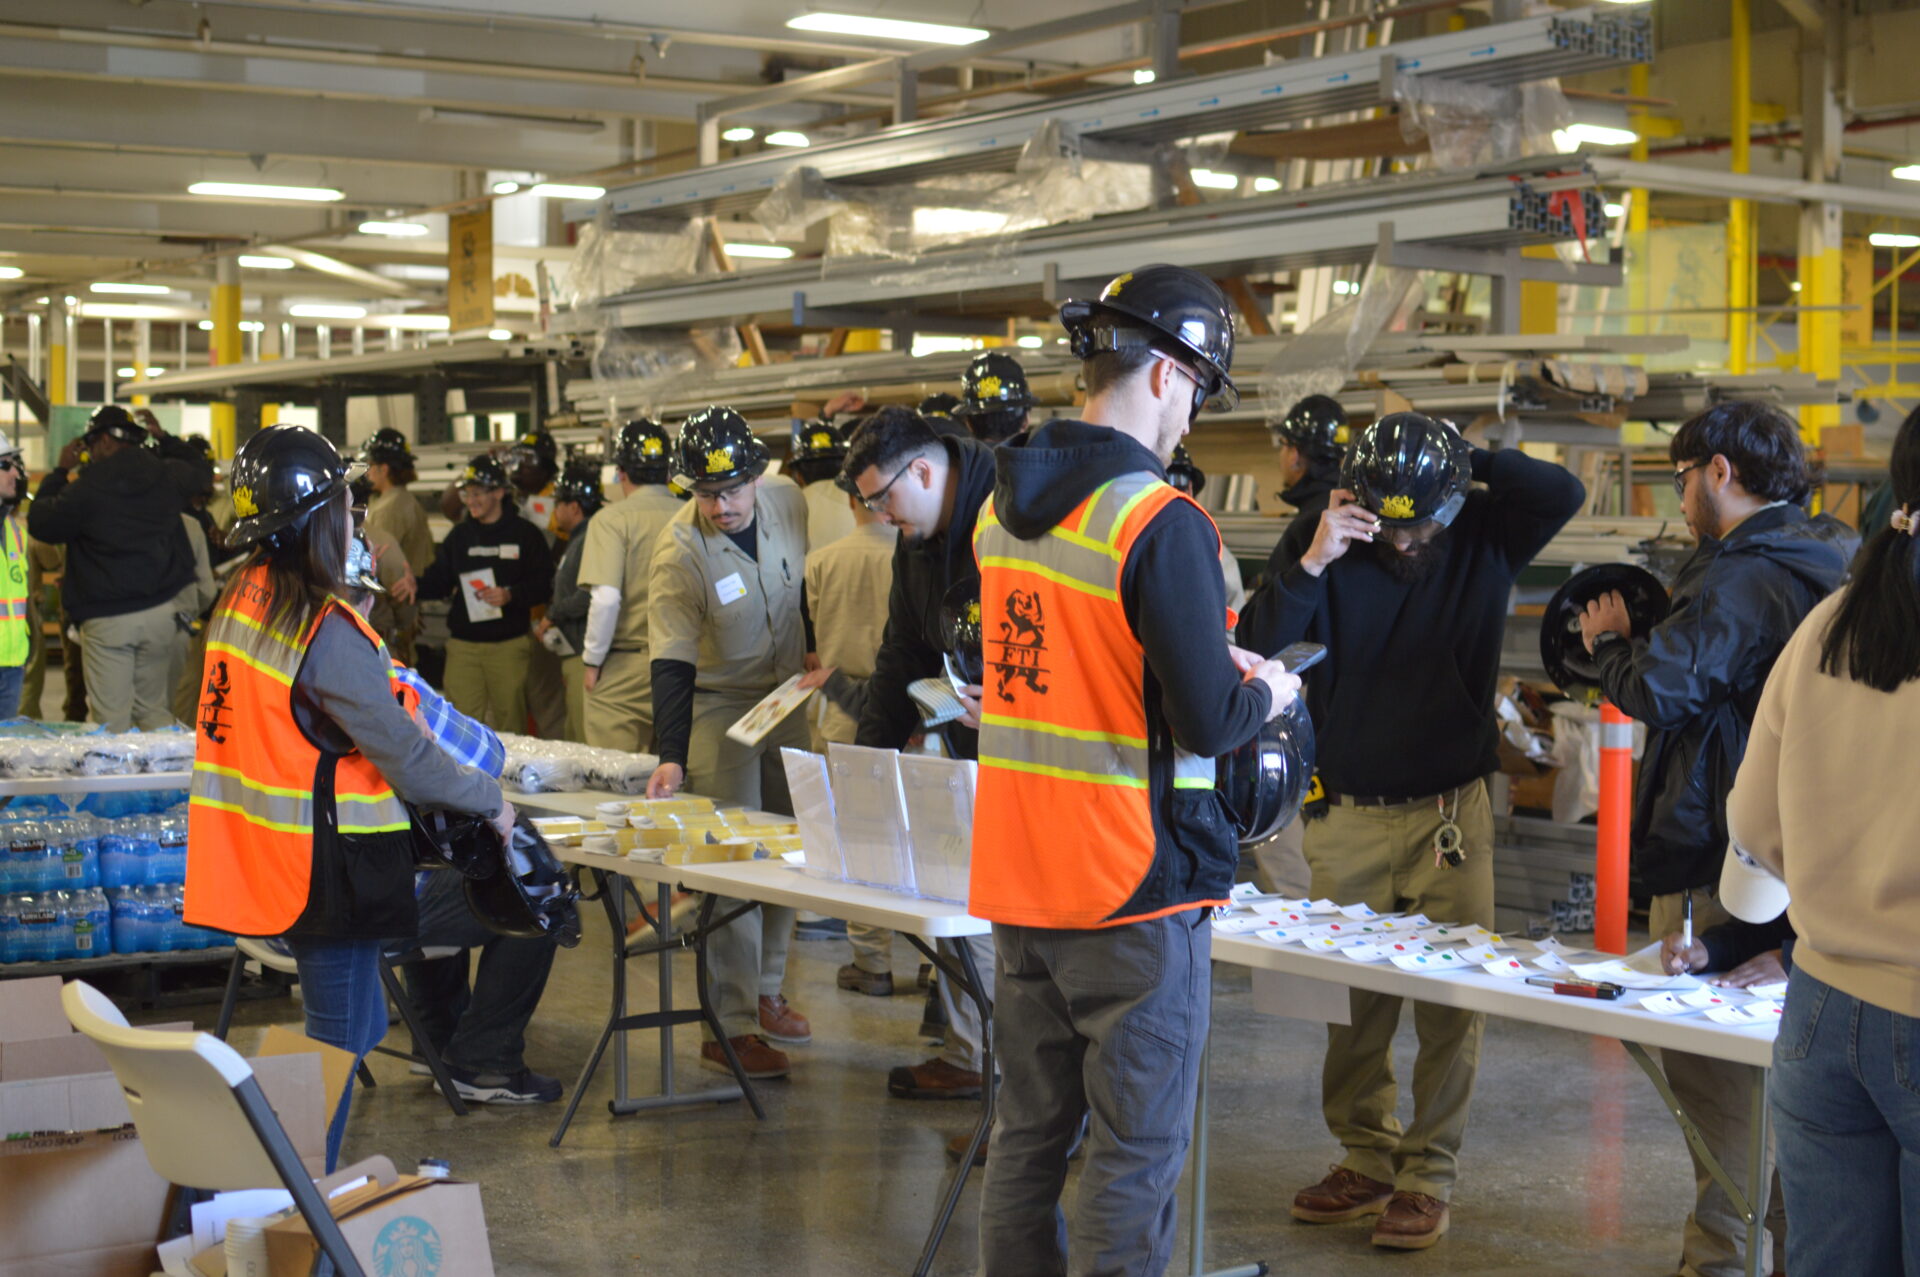 Image from the Gallery: DC16 Training Center Hosts CTWI Spring Open House – San Leandro, CA